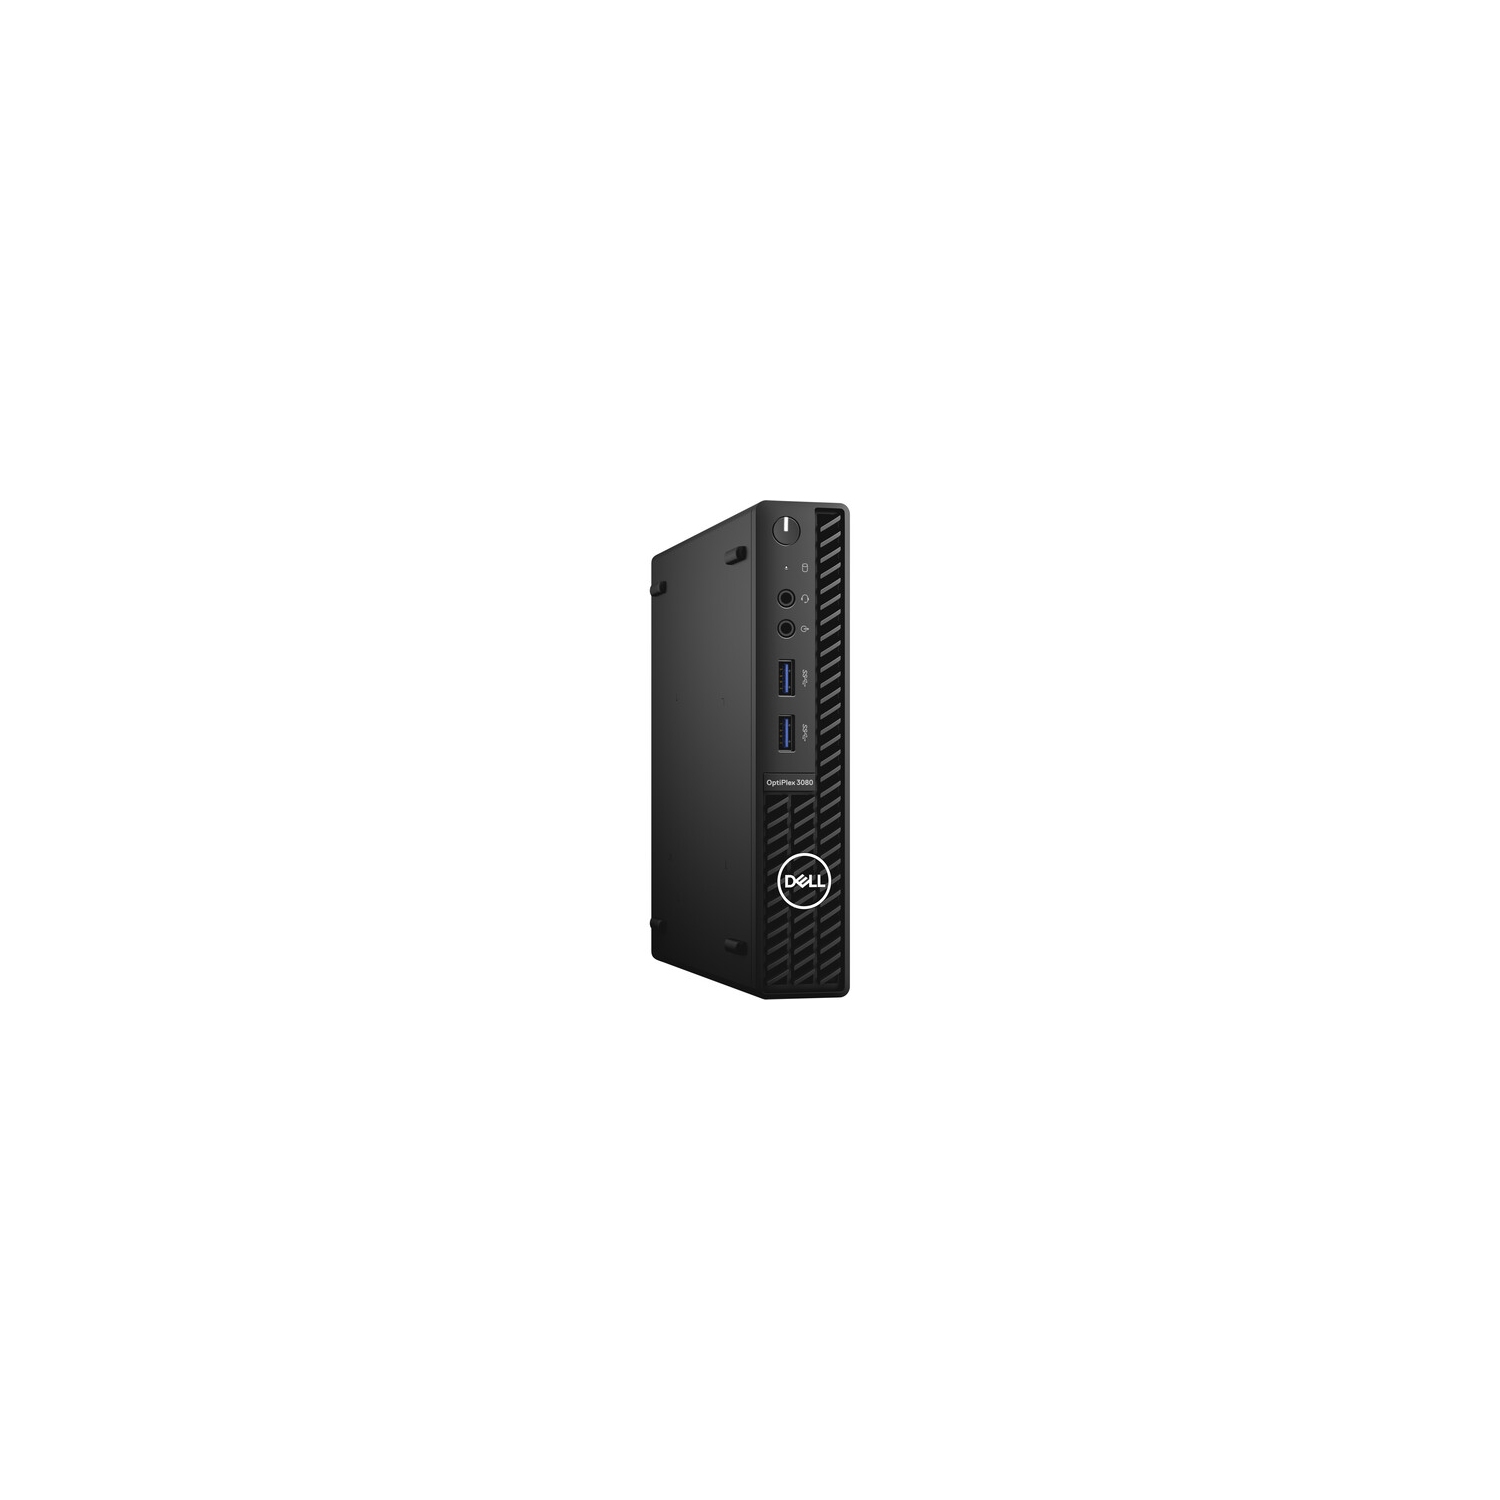 Refurbished (Excellent) - Dell OptiPlex 3000 3080 Micro Tower Desktop (2020) | Core i5 - 512GB SSD - 16GB RAM | 6 Cores @ 3.8 GHz - 10th Gen CPU Certified Refurbished